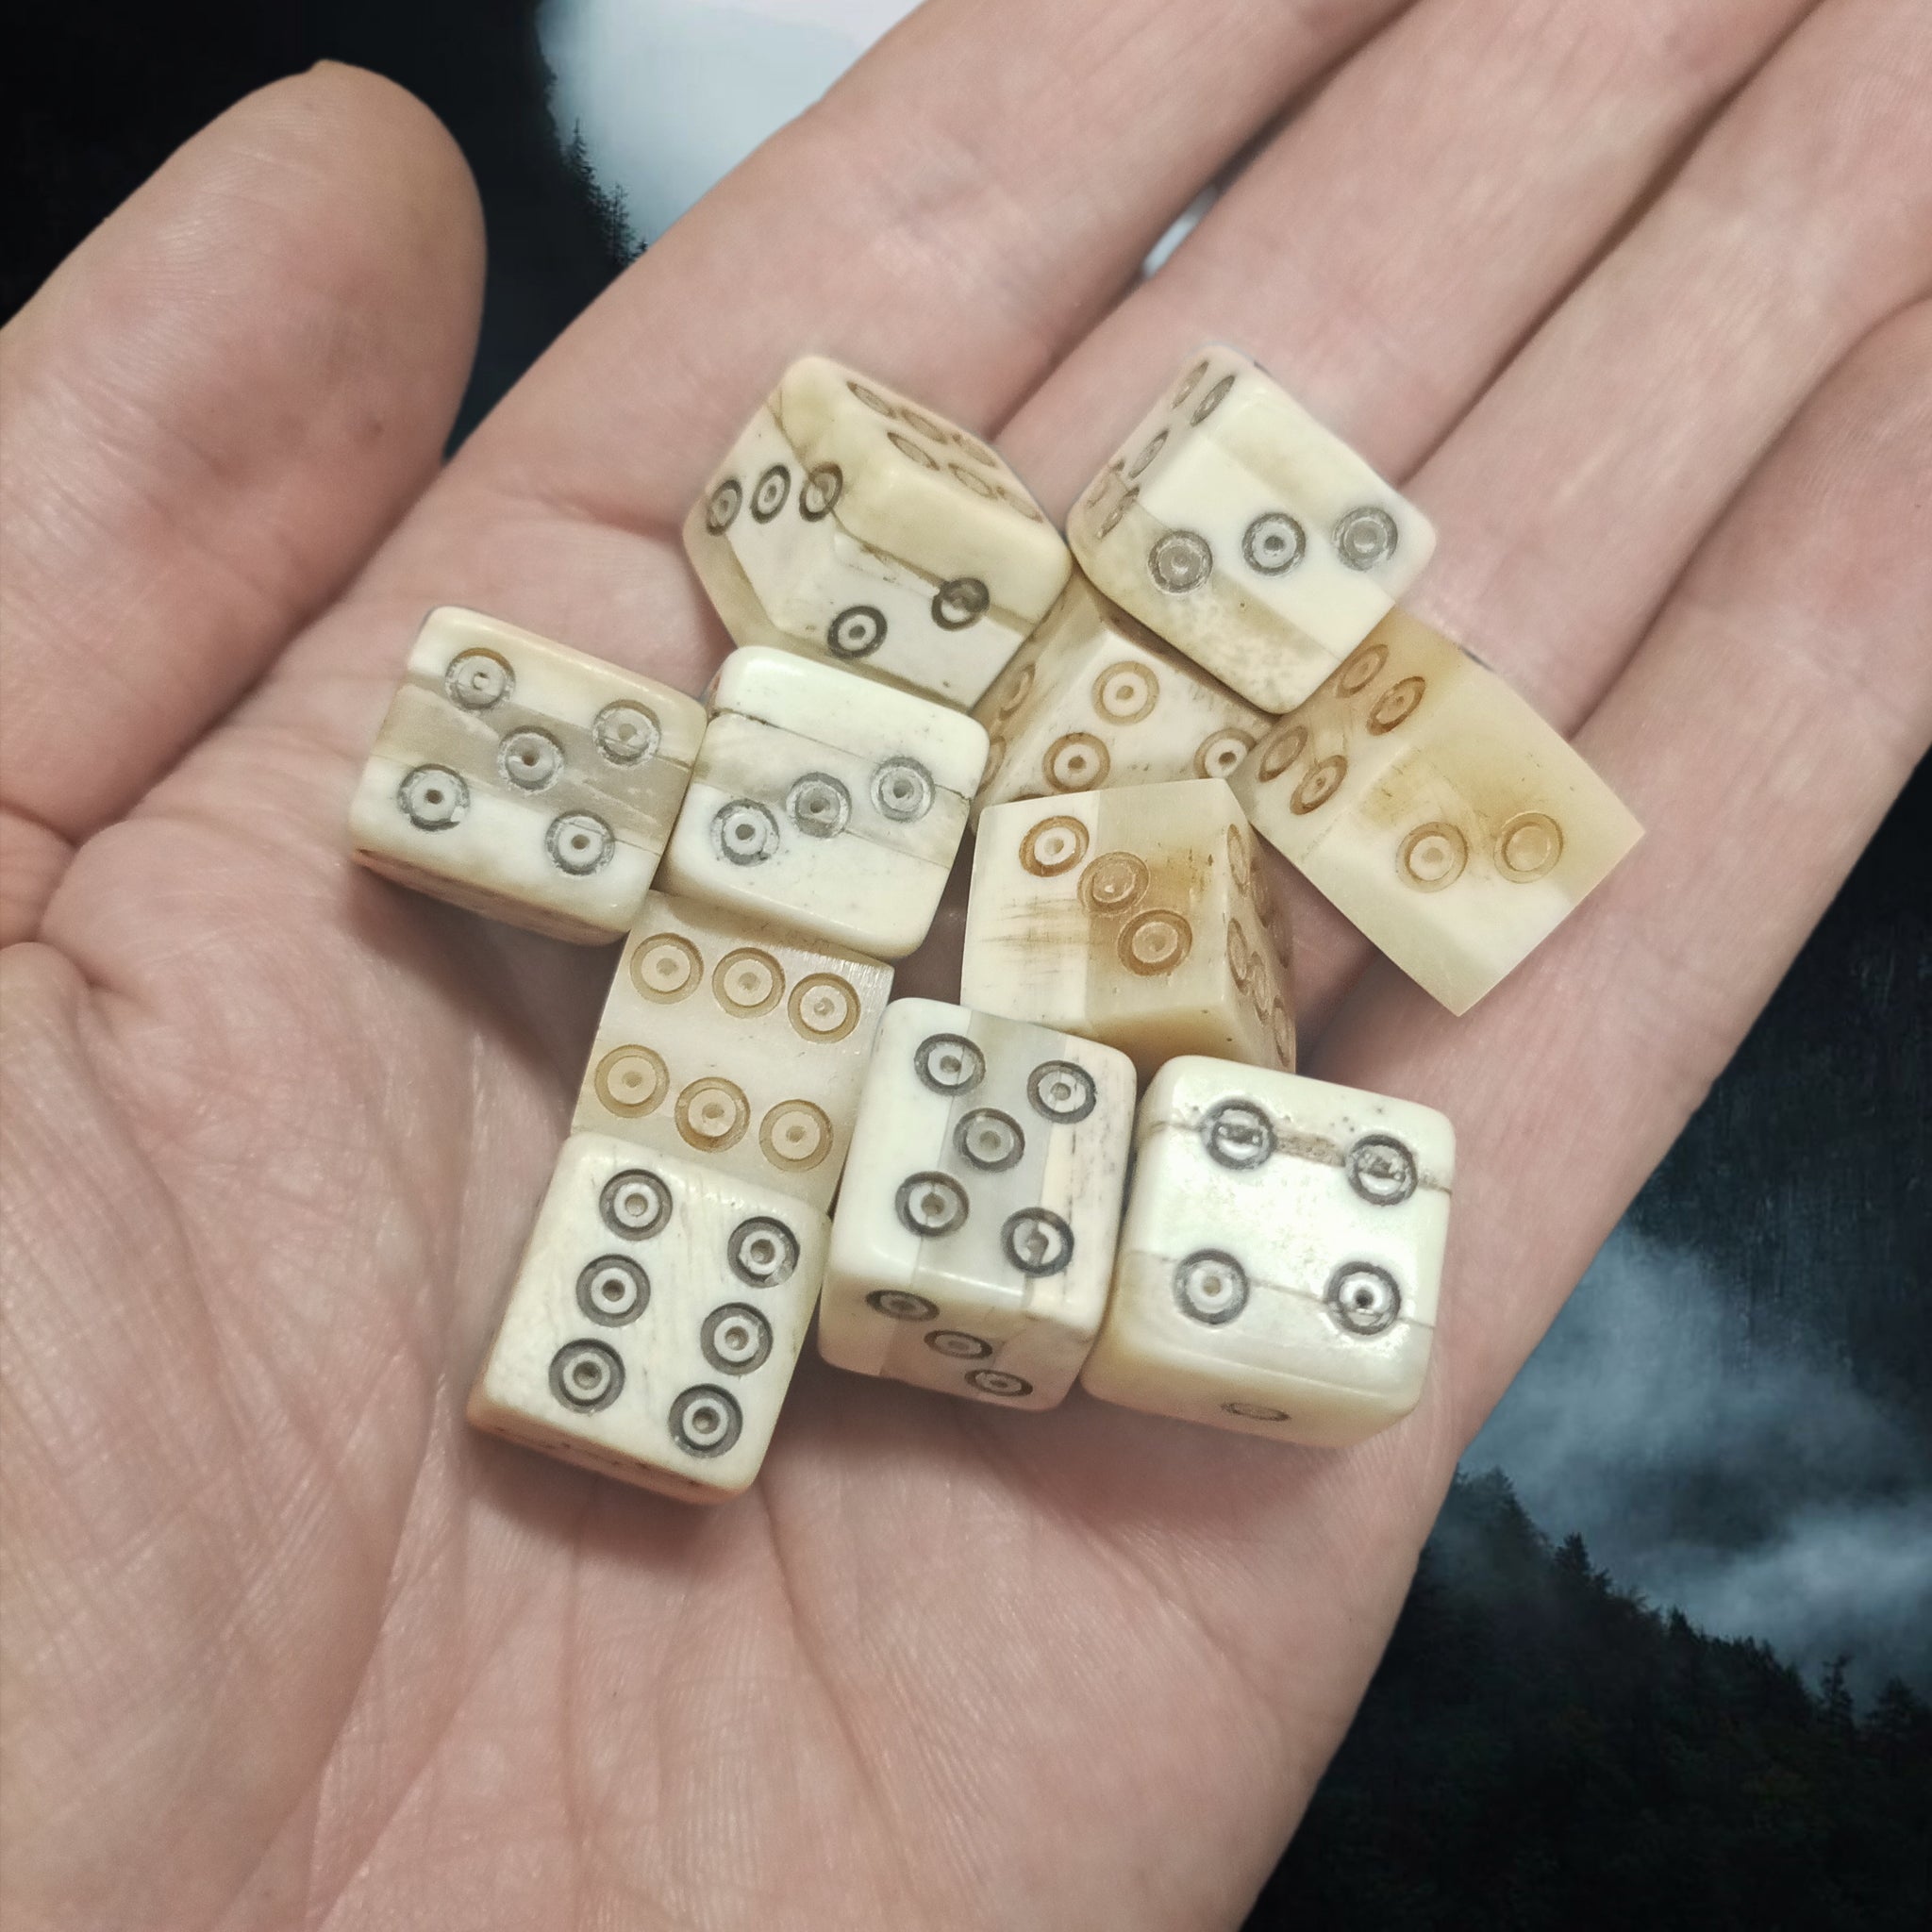 Large Size Cow Bone Dice Replicas with Hand-Carved Dot & Ring Spots on Hand